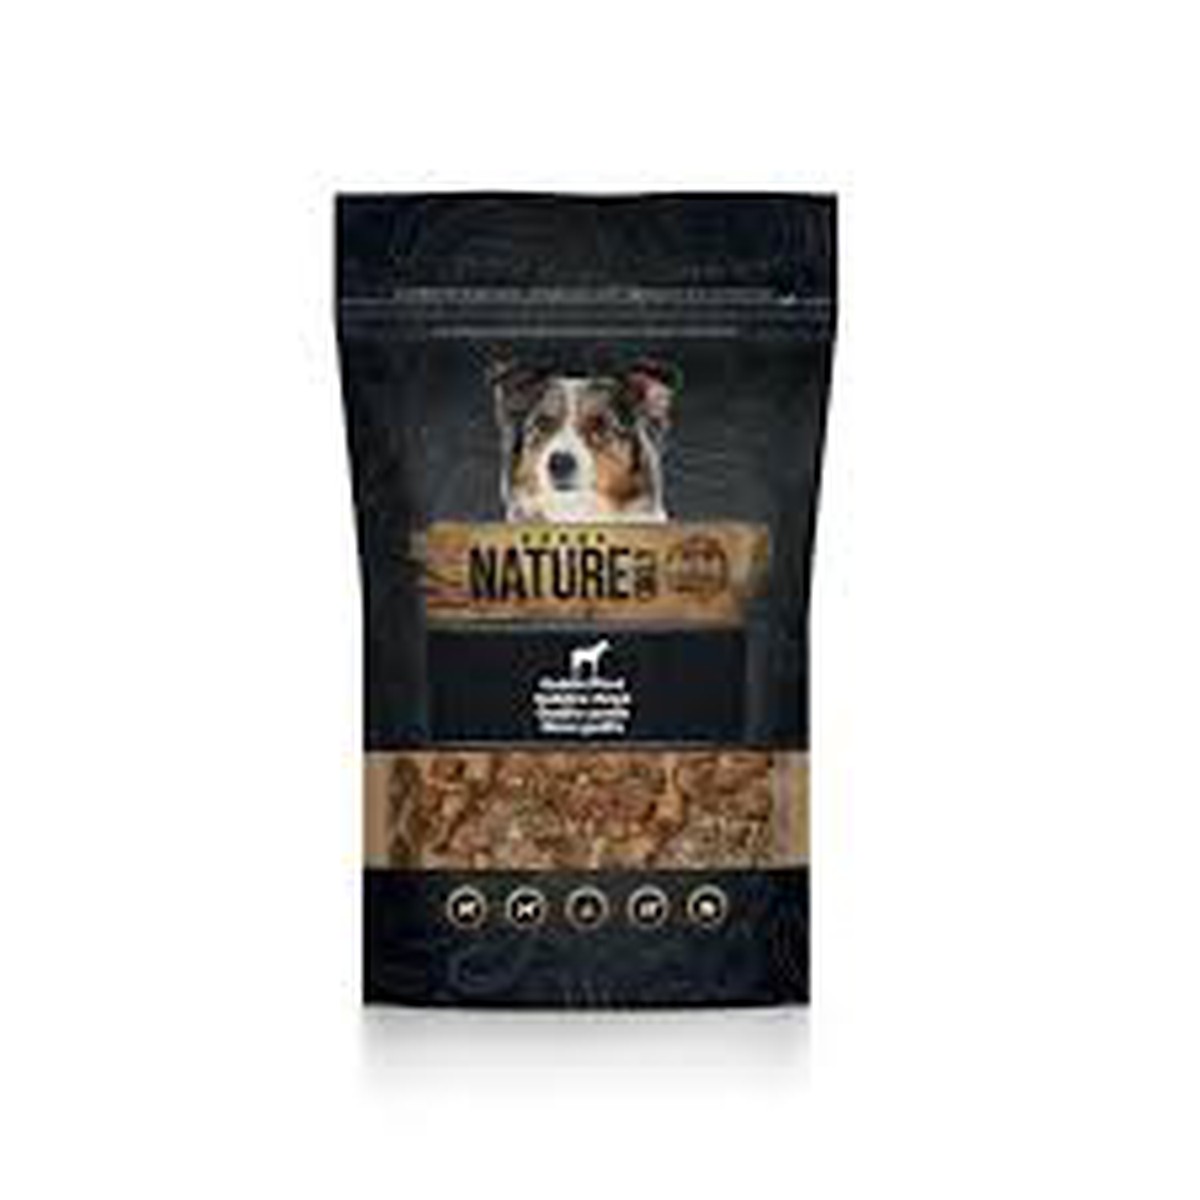 Natureon  Nature only guddis cheval 120g  